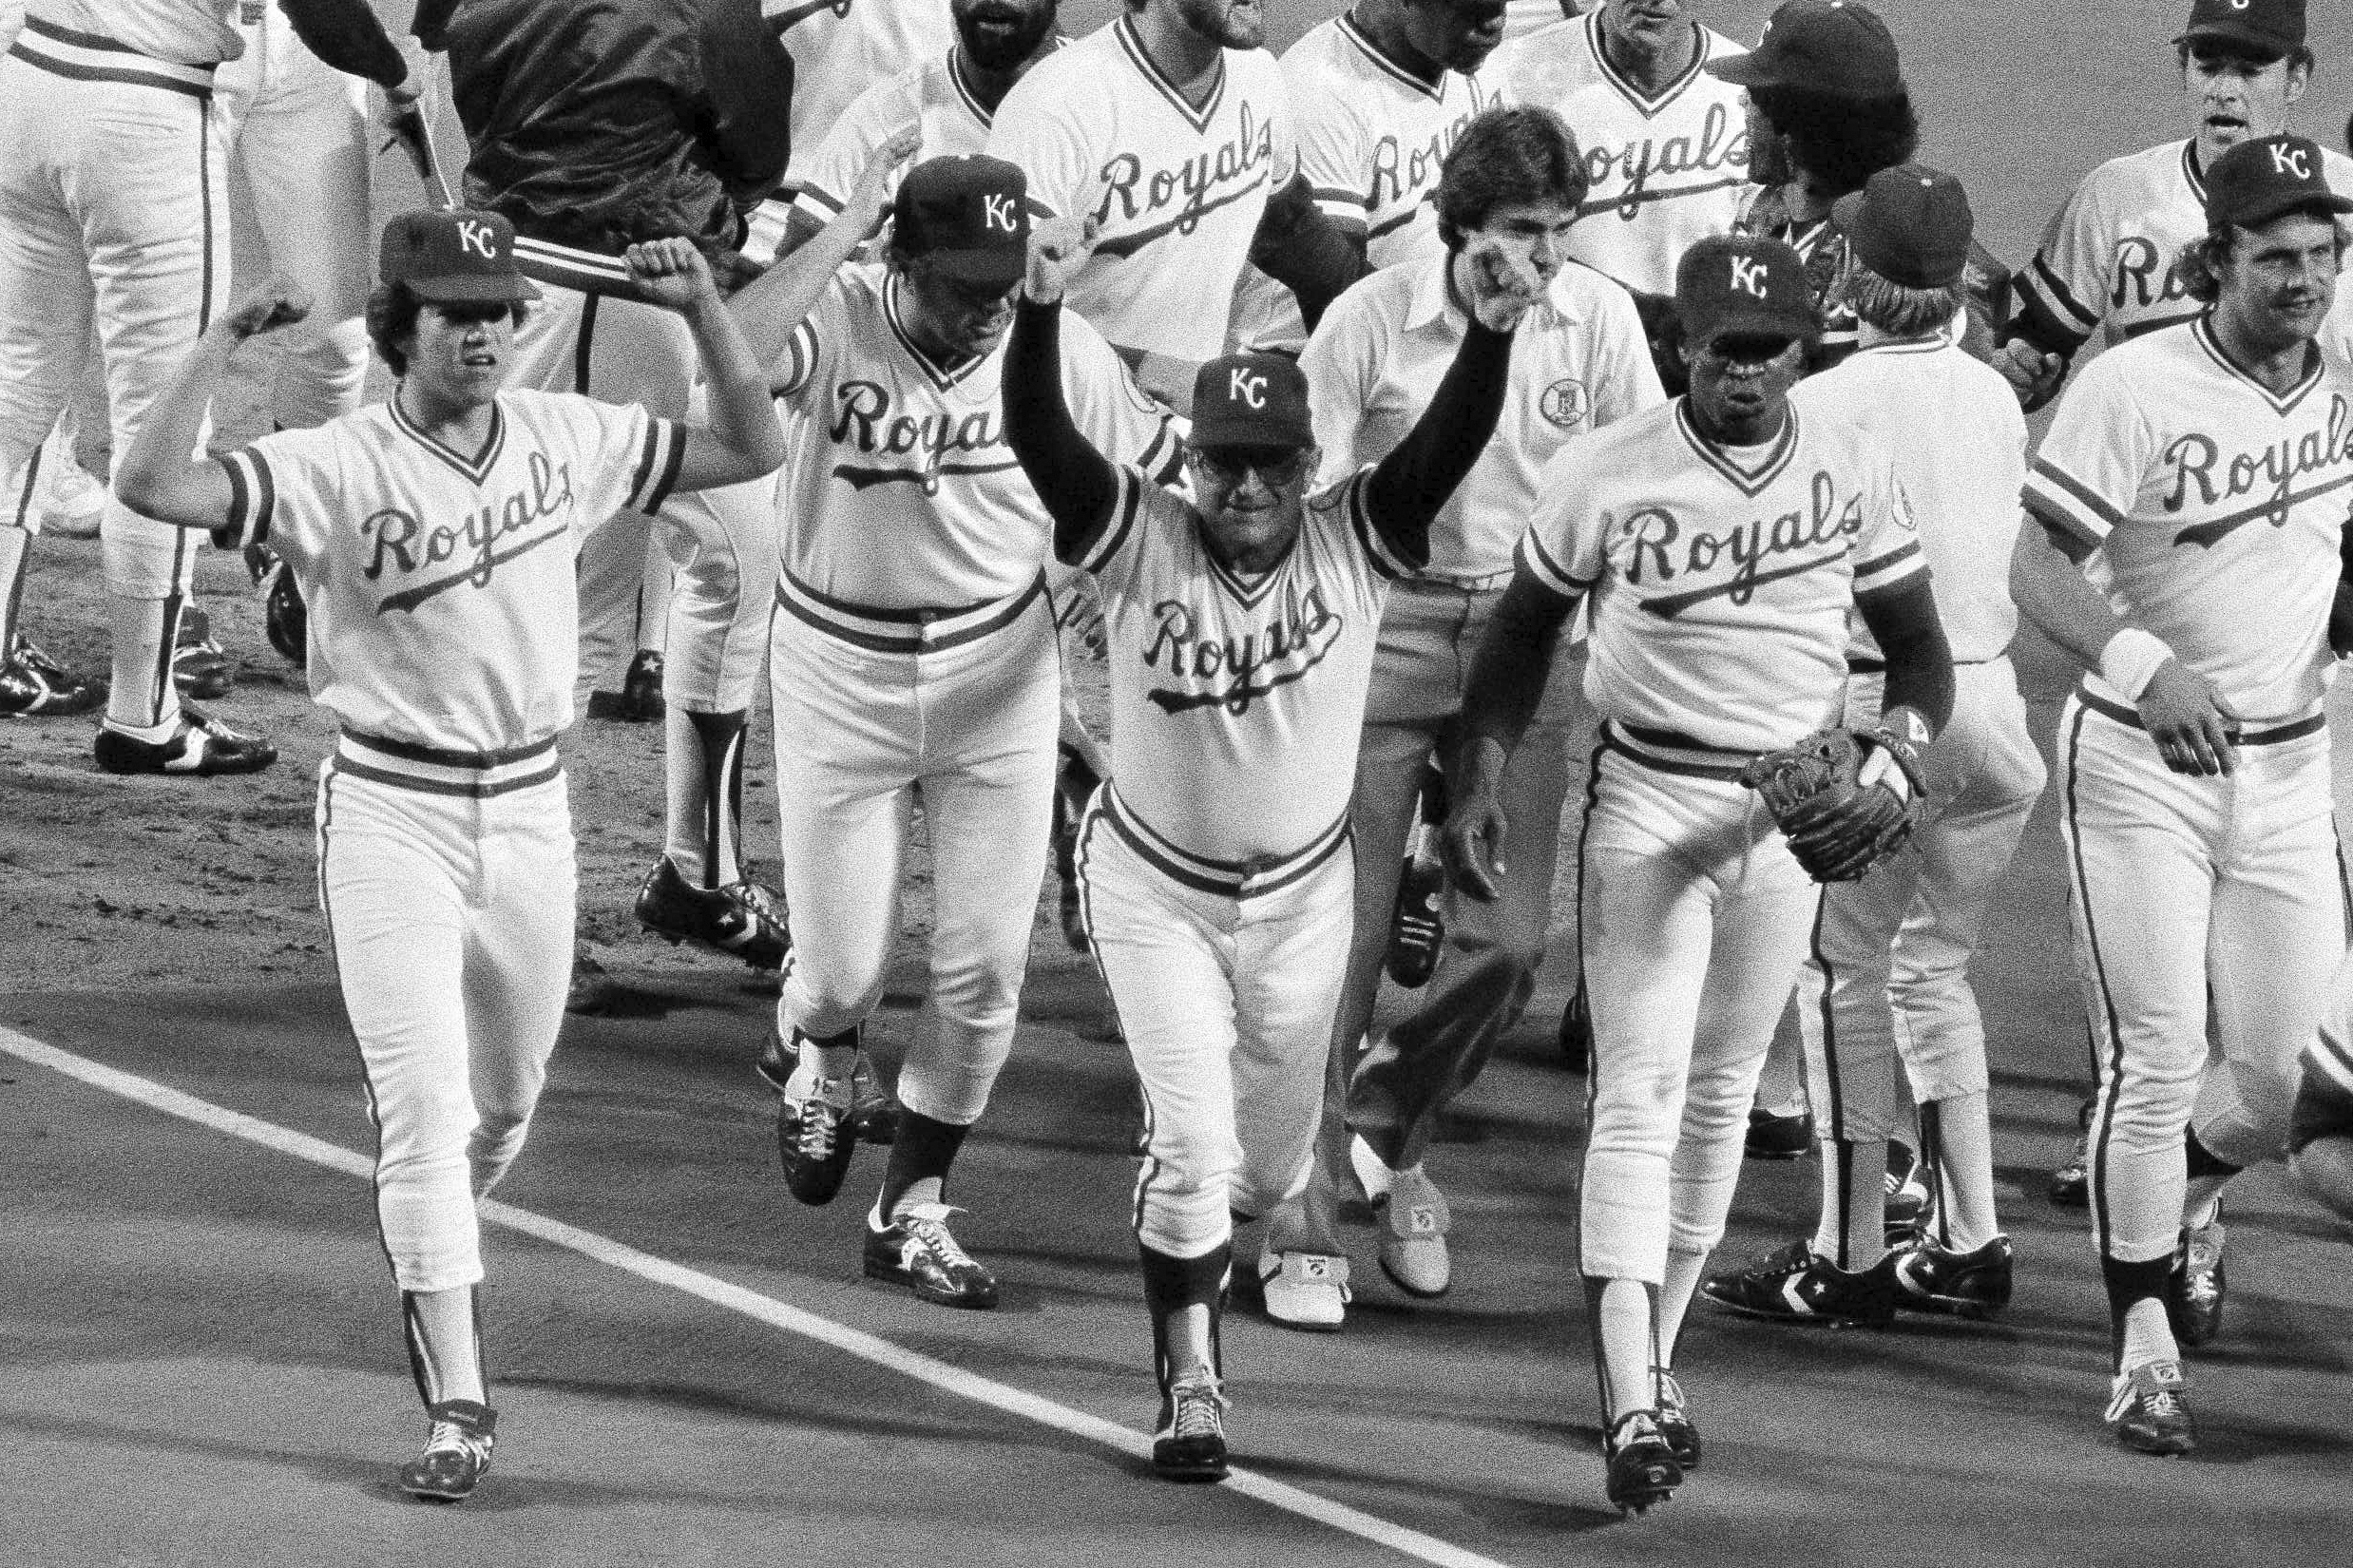 Goose Gossage to join 1984 World Series Q&A as part of local